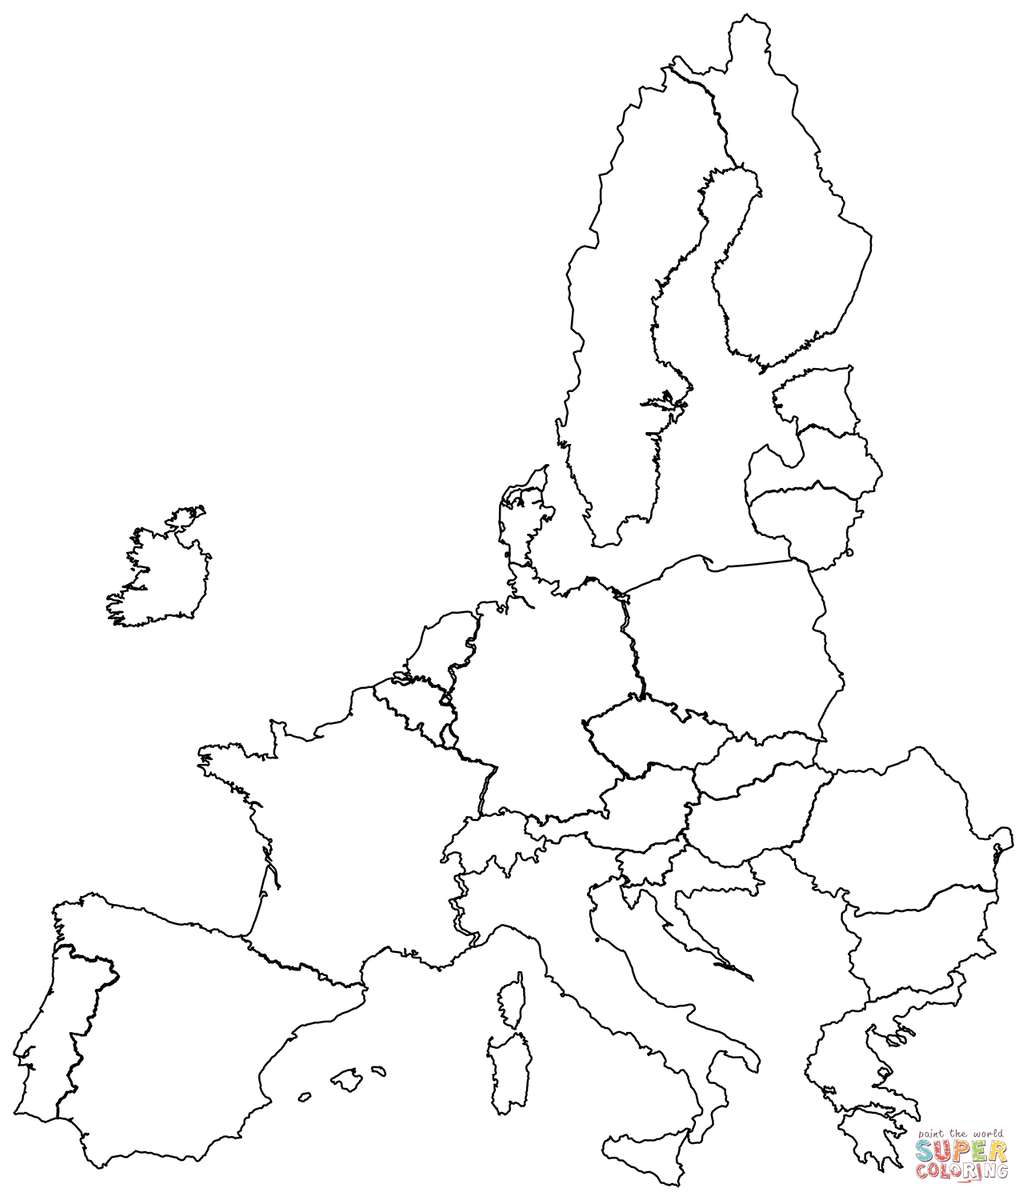 Map of the European Union jigsaw puzzle online